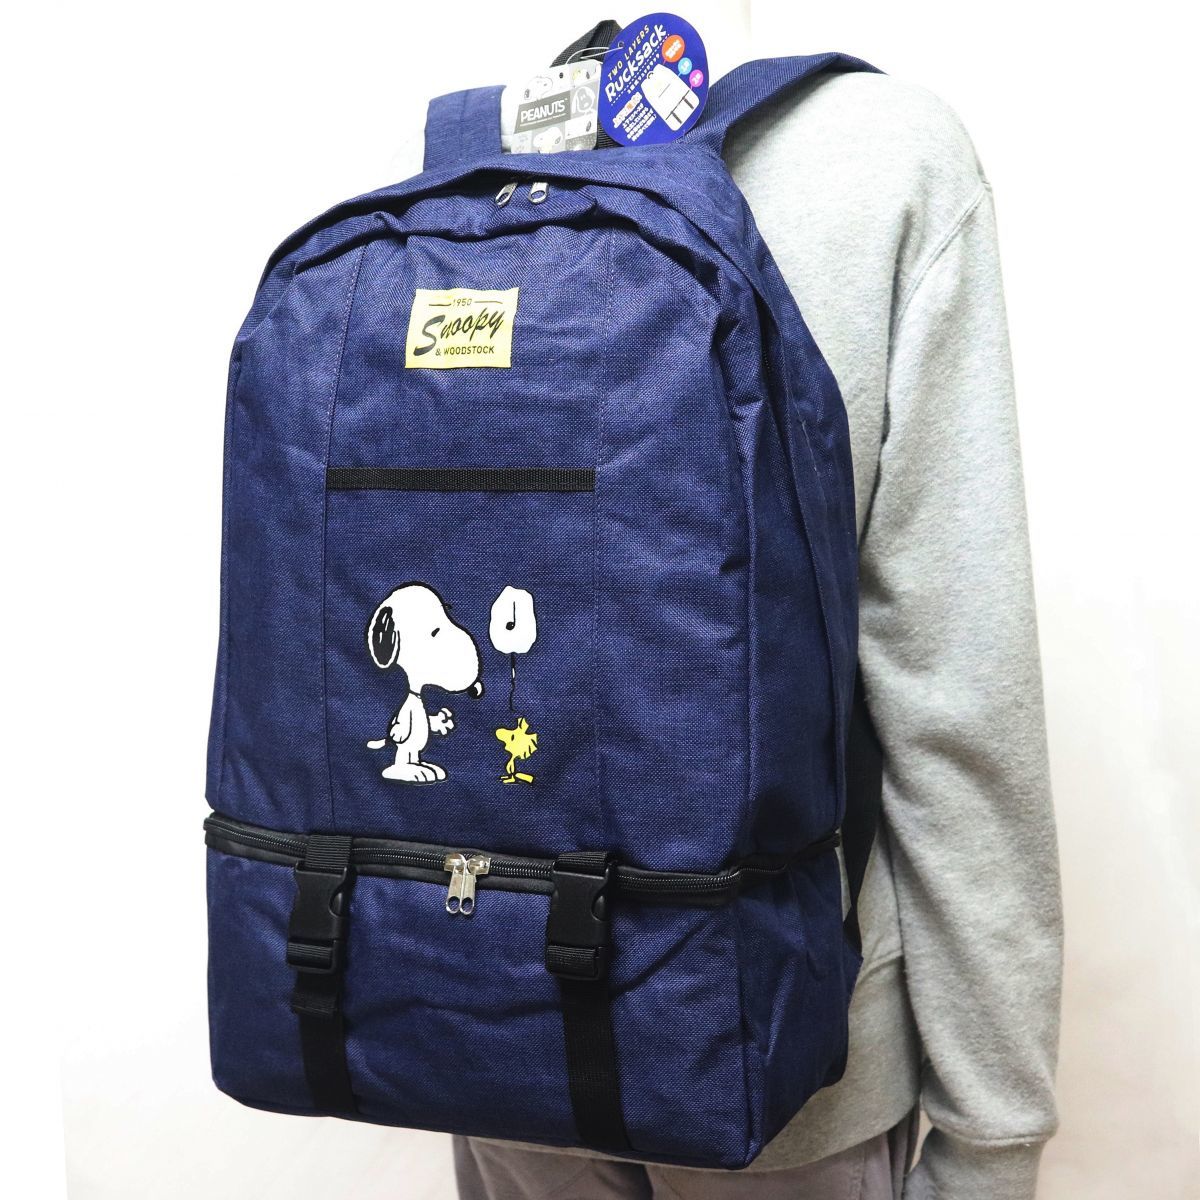 * Snoopy Peanuts SNOOPY PEANUTS new goods 2 layer type rucksack Day Pack backpack bag navy blue [SNOOPYA-NVY1N] one six *QWER*